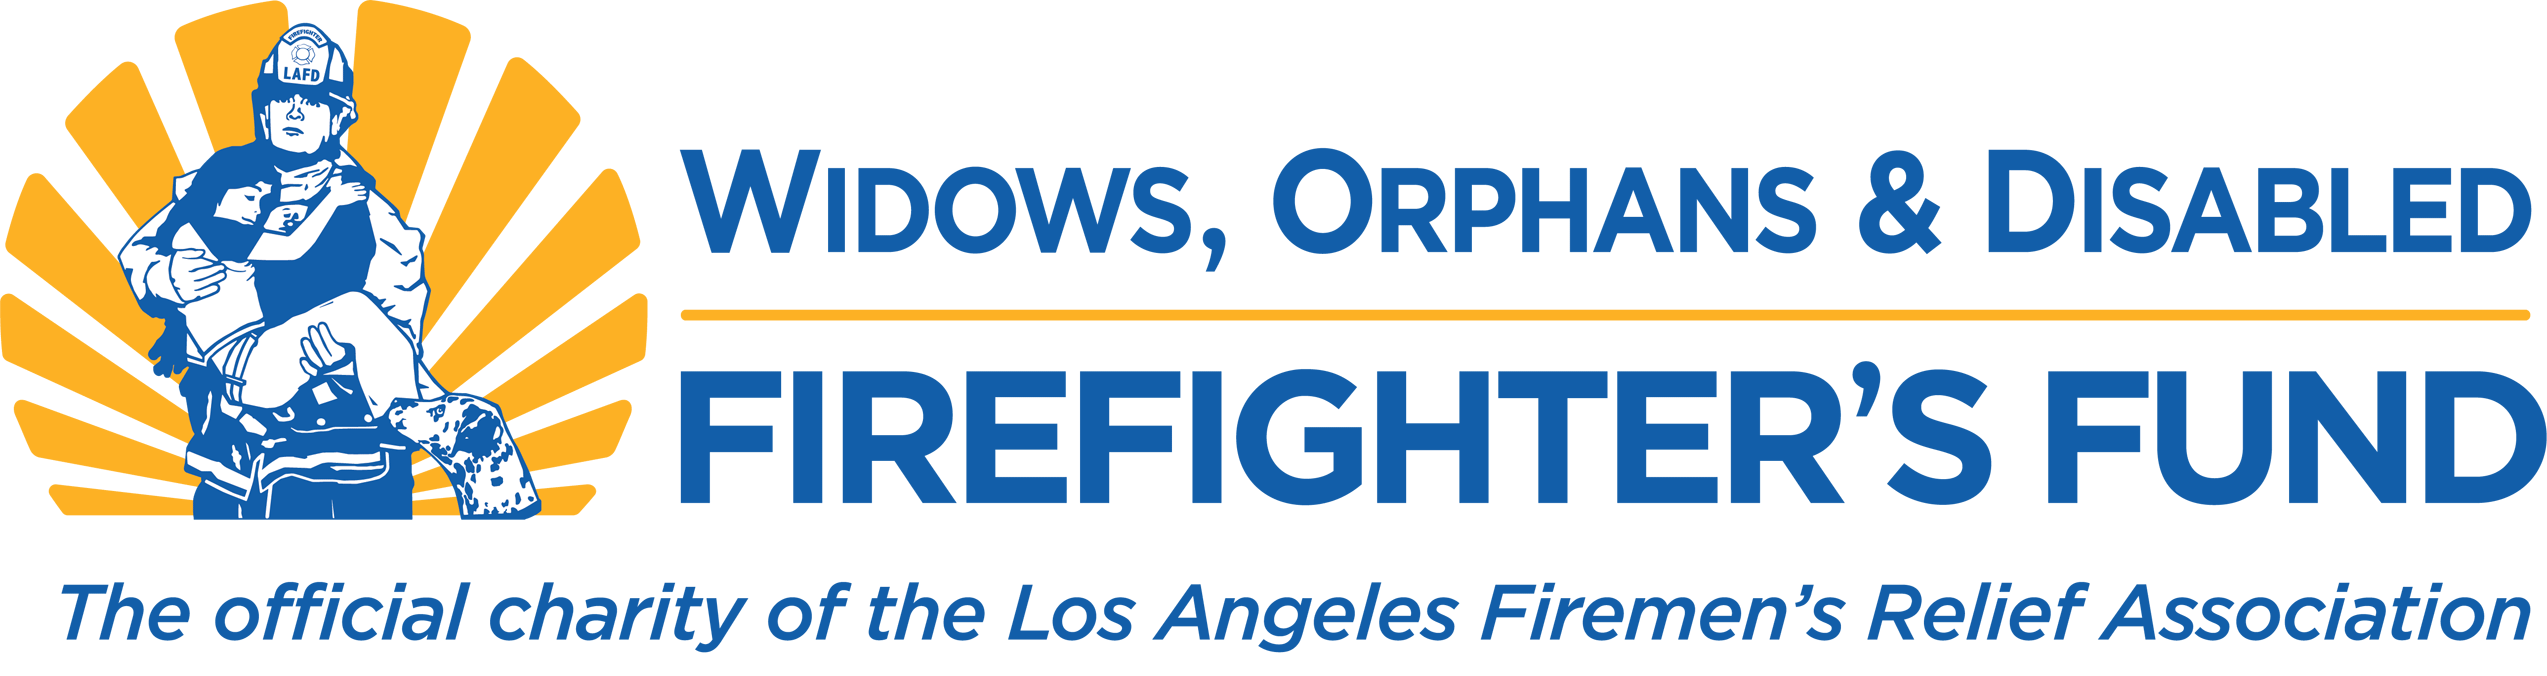 Widows, Orphans & Disabled Firefighter’s Fund